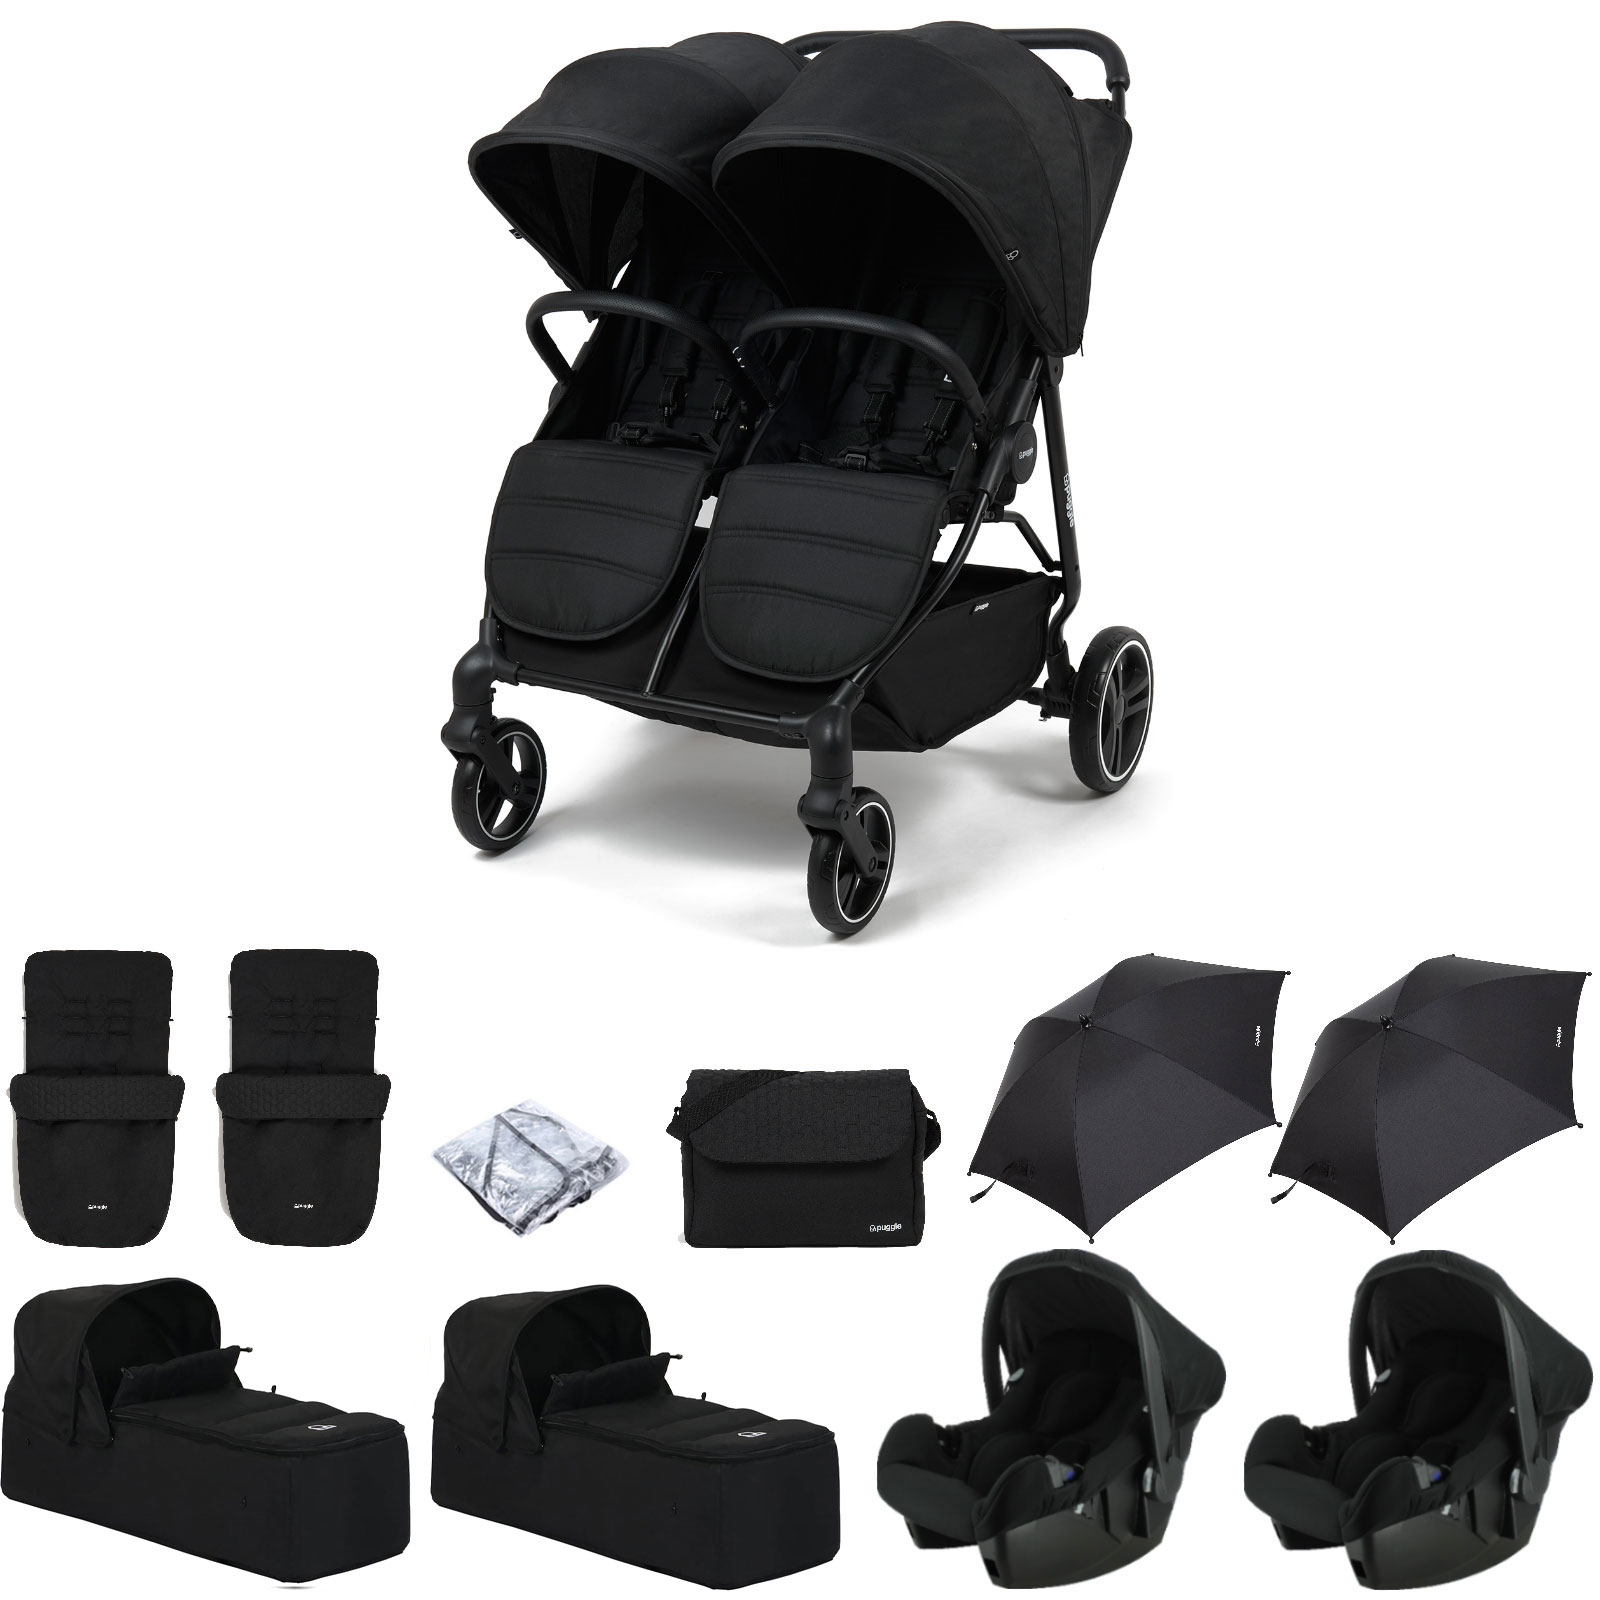 Puggle Urban City Easyfold Twin Pushchair with 2 Beone Car Seats, 2 Carrycots, 2 Footmuffs, 2 Parasols & Changing Bag – Storm Black